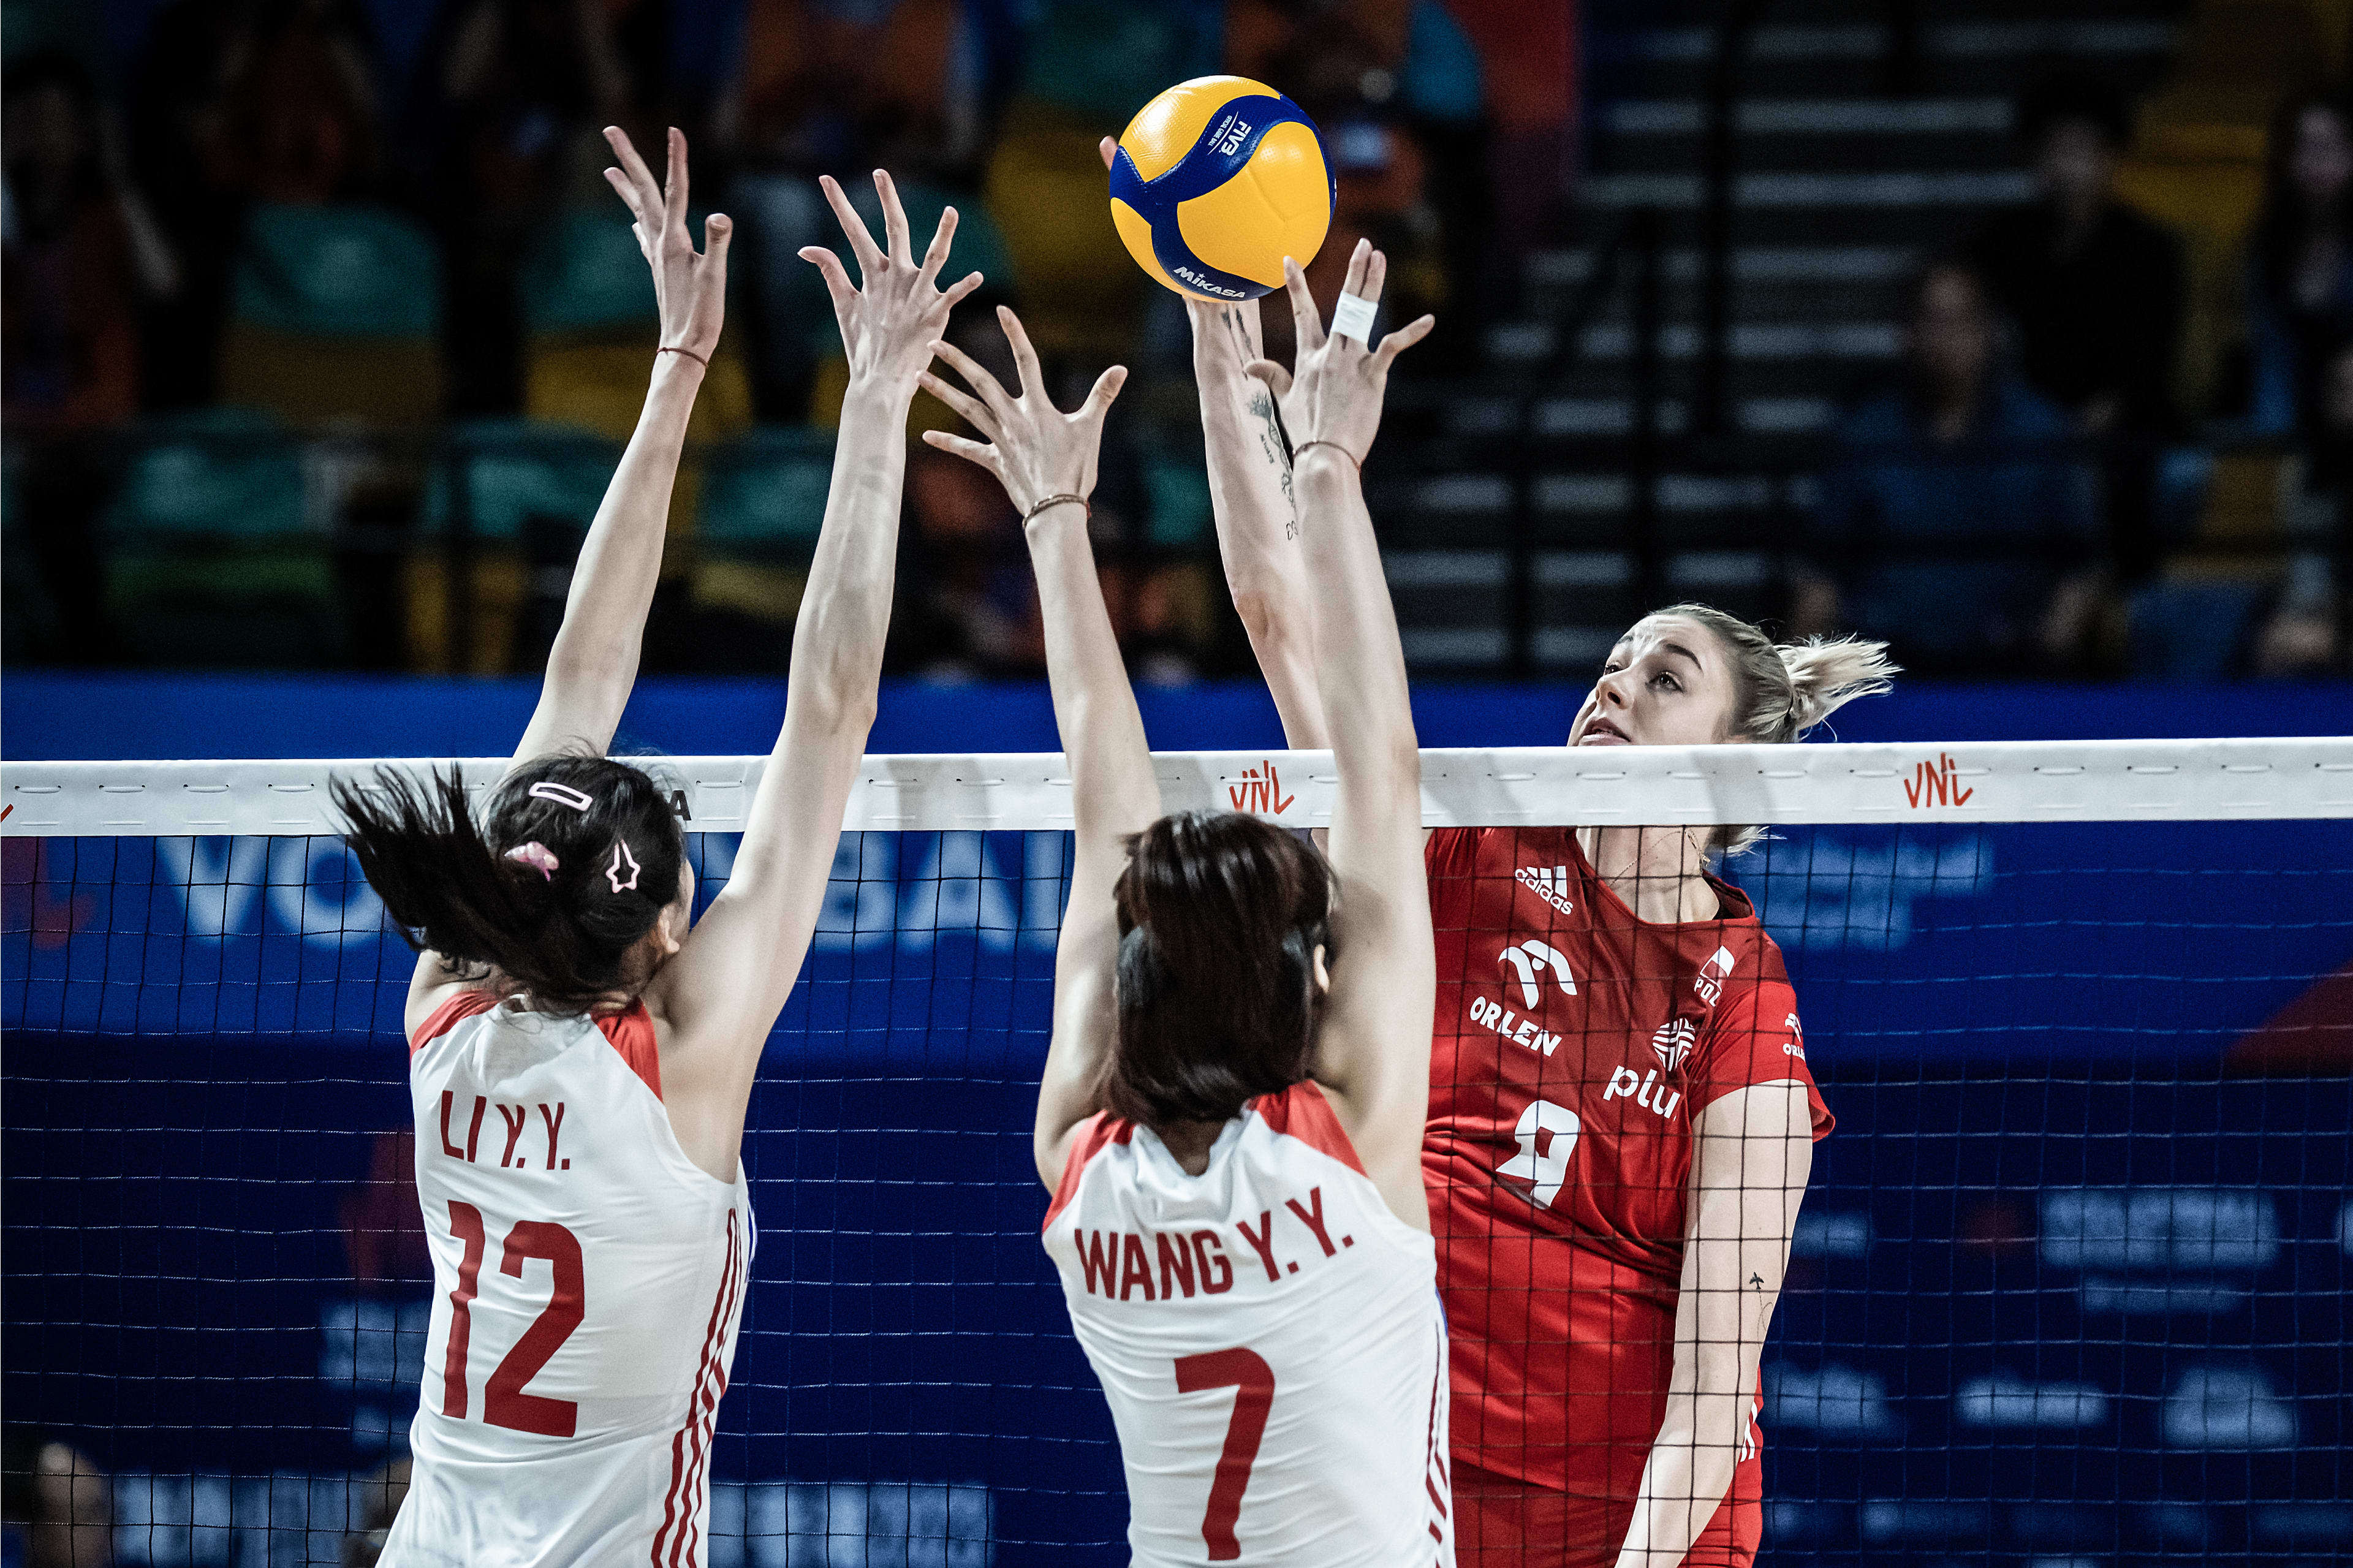 Poland’s Magdalena Stysiak in action against China on Saturday night at the Volleyball Nations League in Hong Kong. Photo: Handout